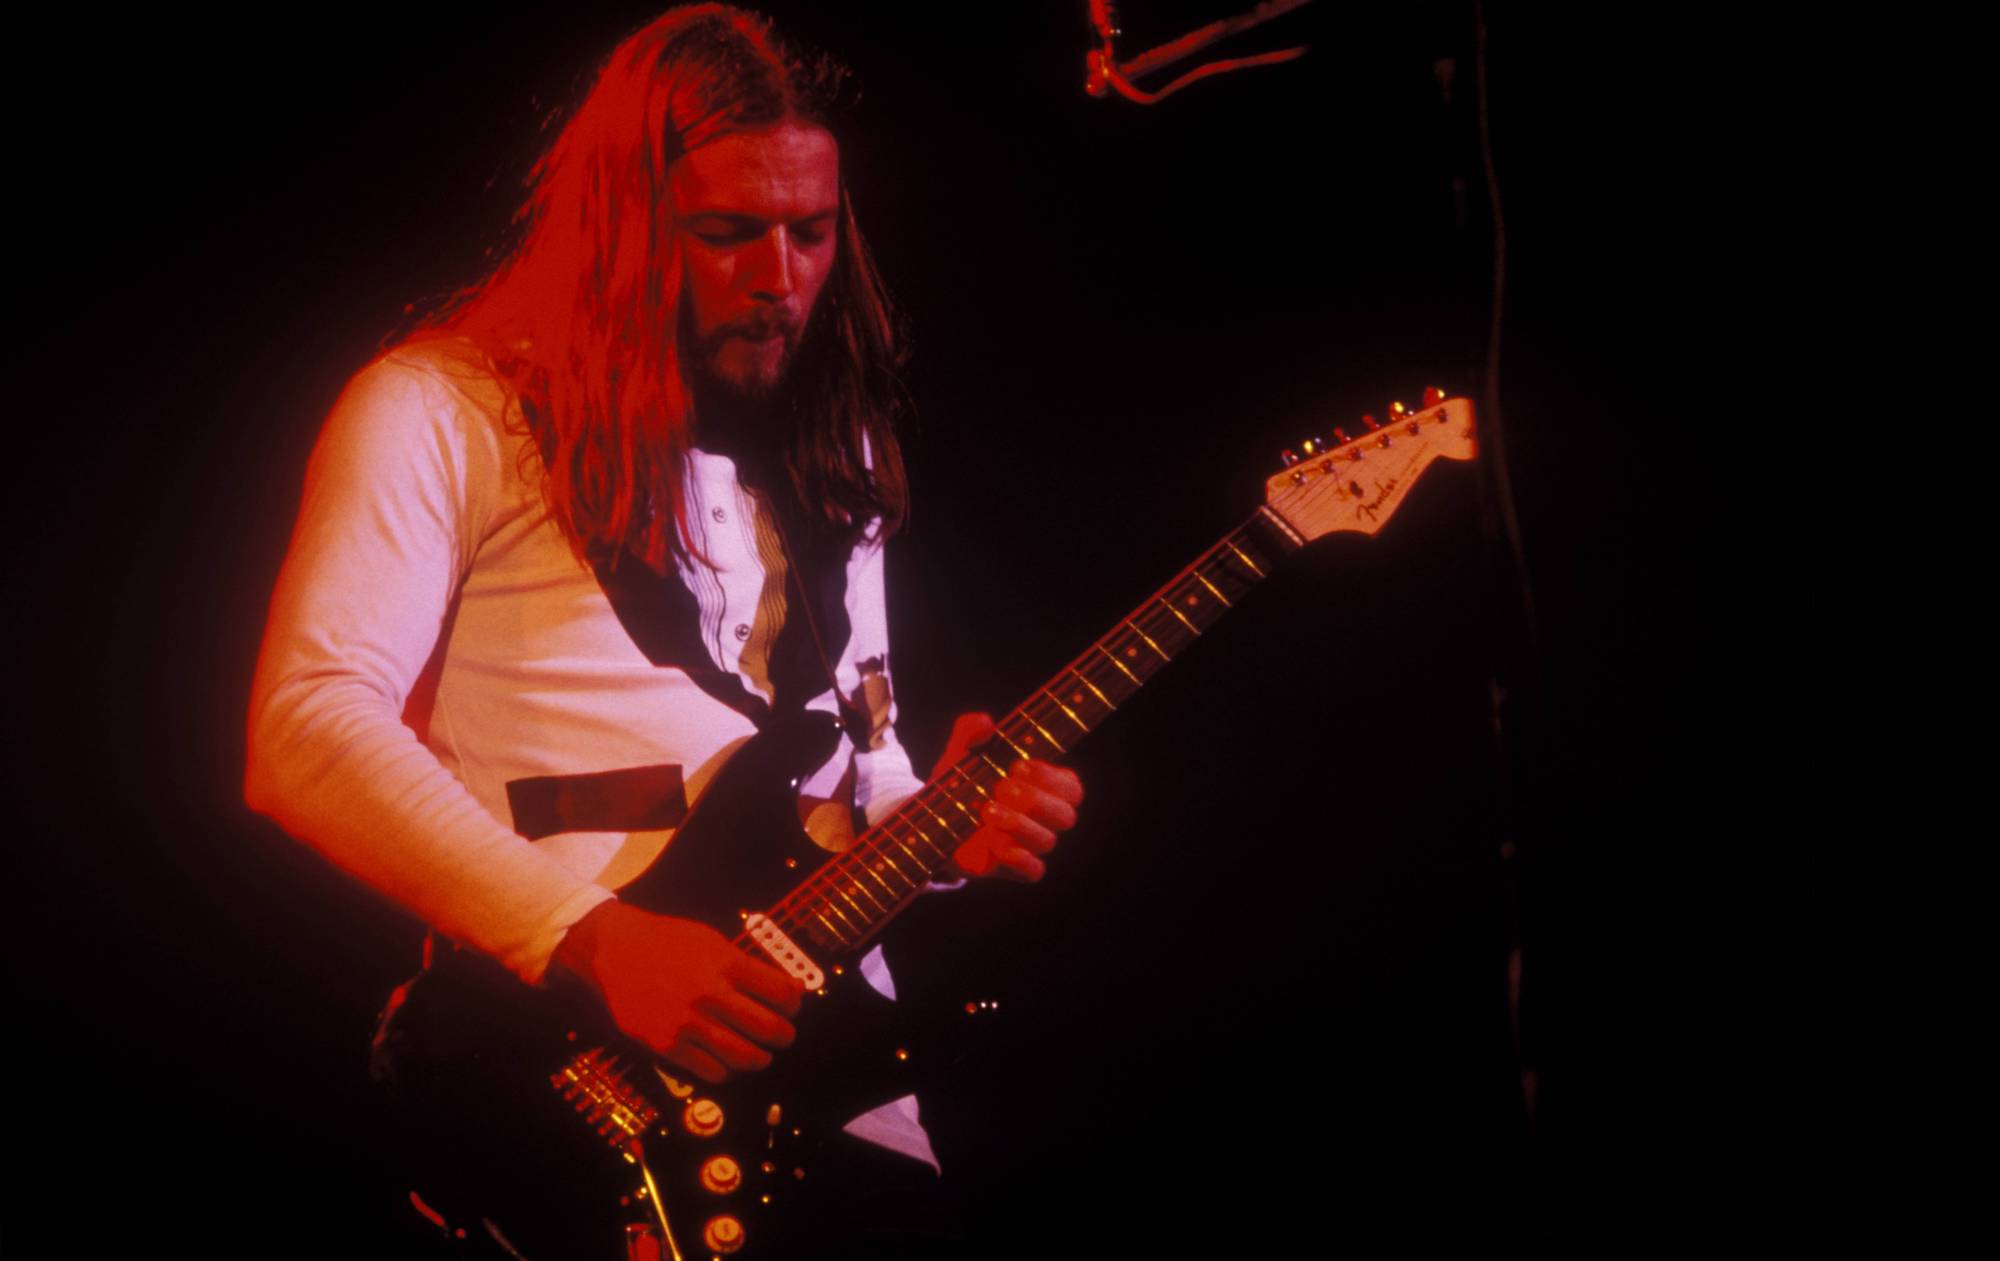 David Gilmour performs onstage with Pink Floyd at the Wembley Empire Pool in London on March 1, 1977